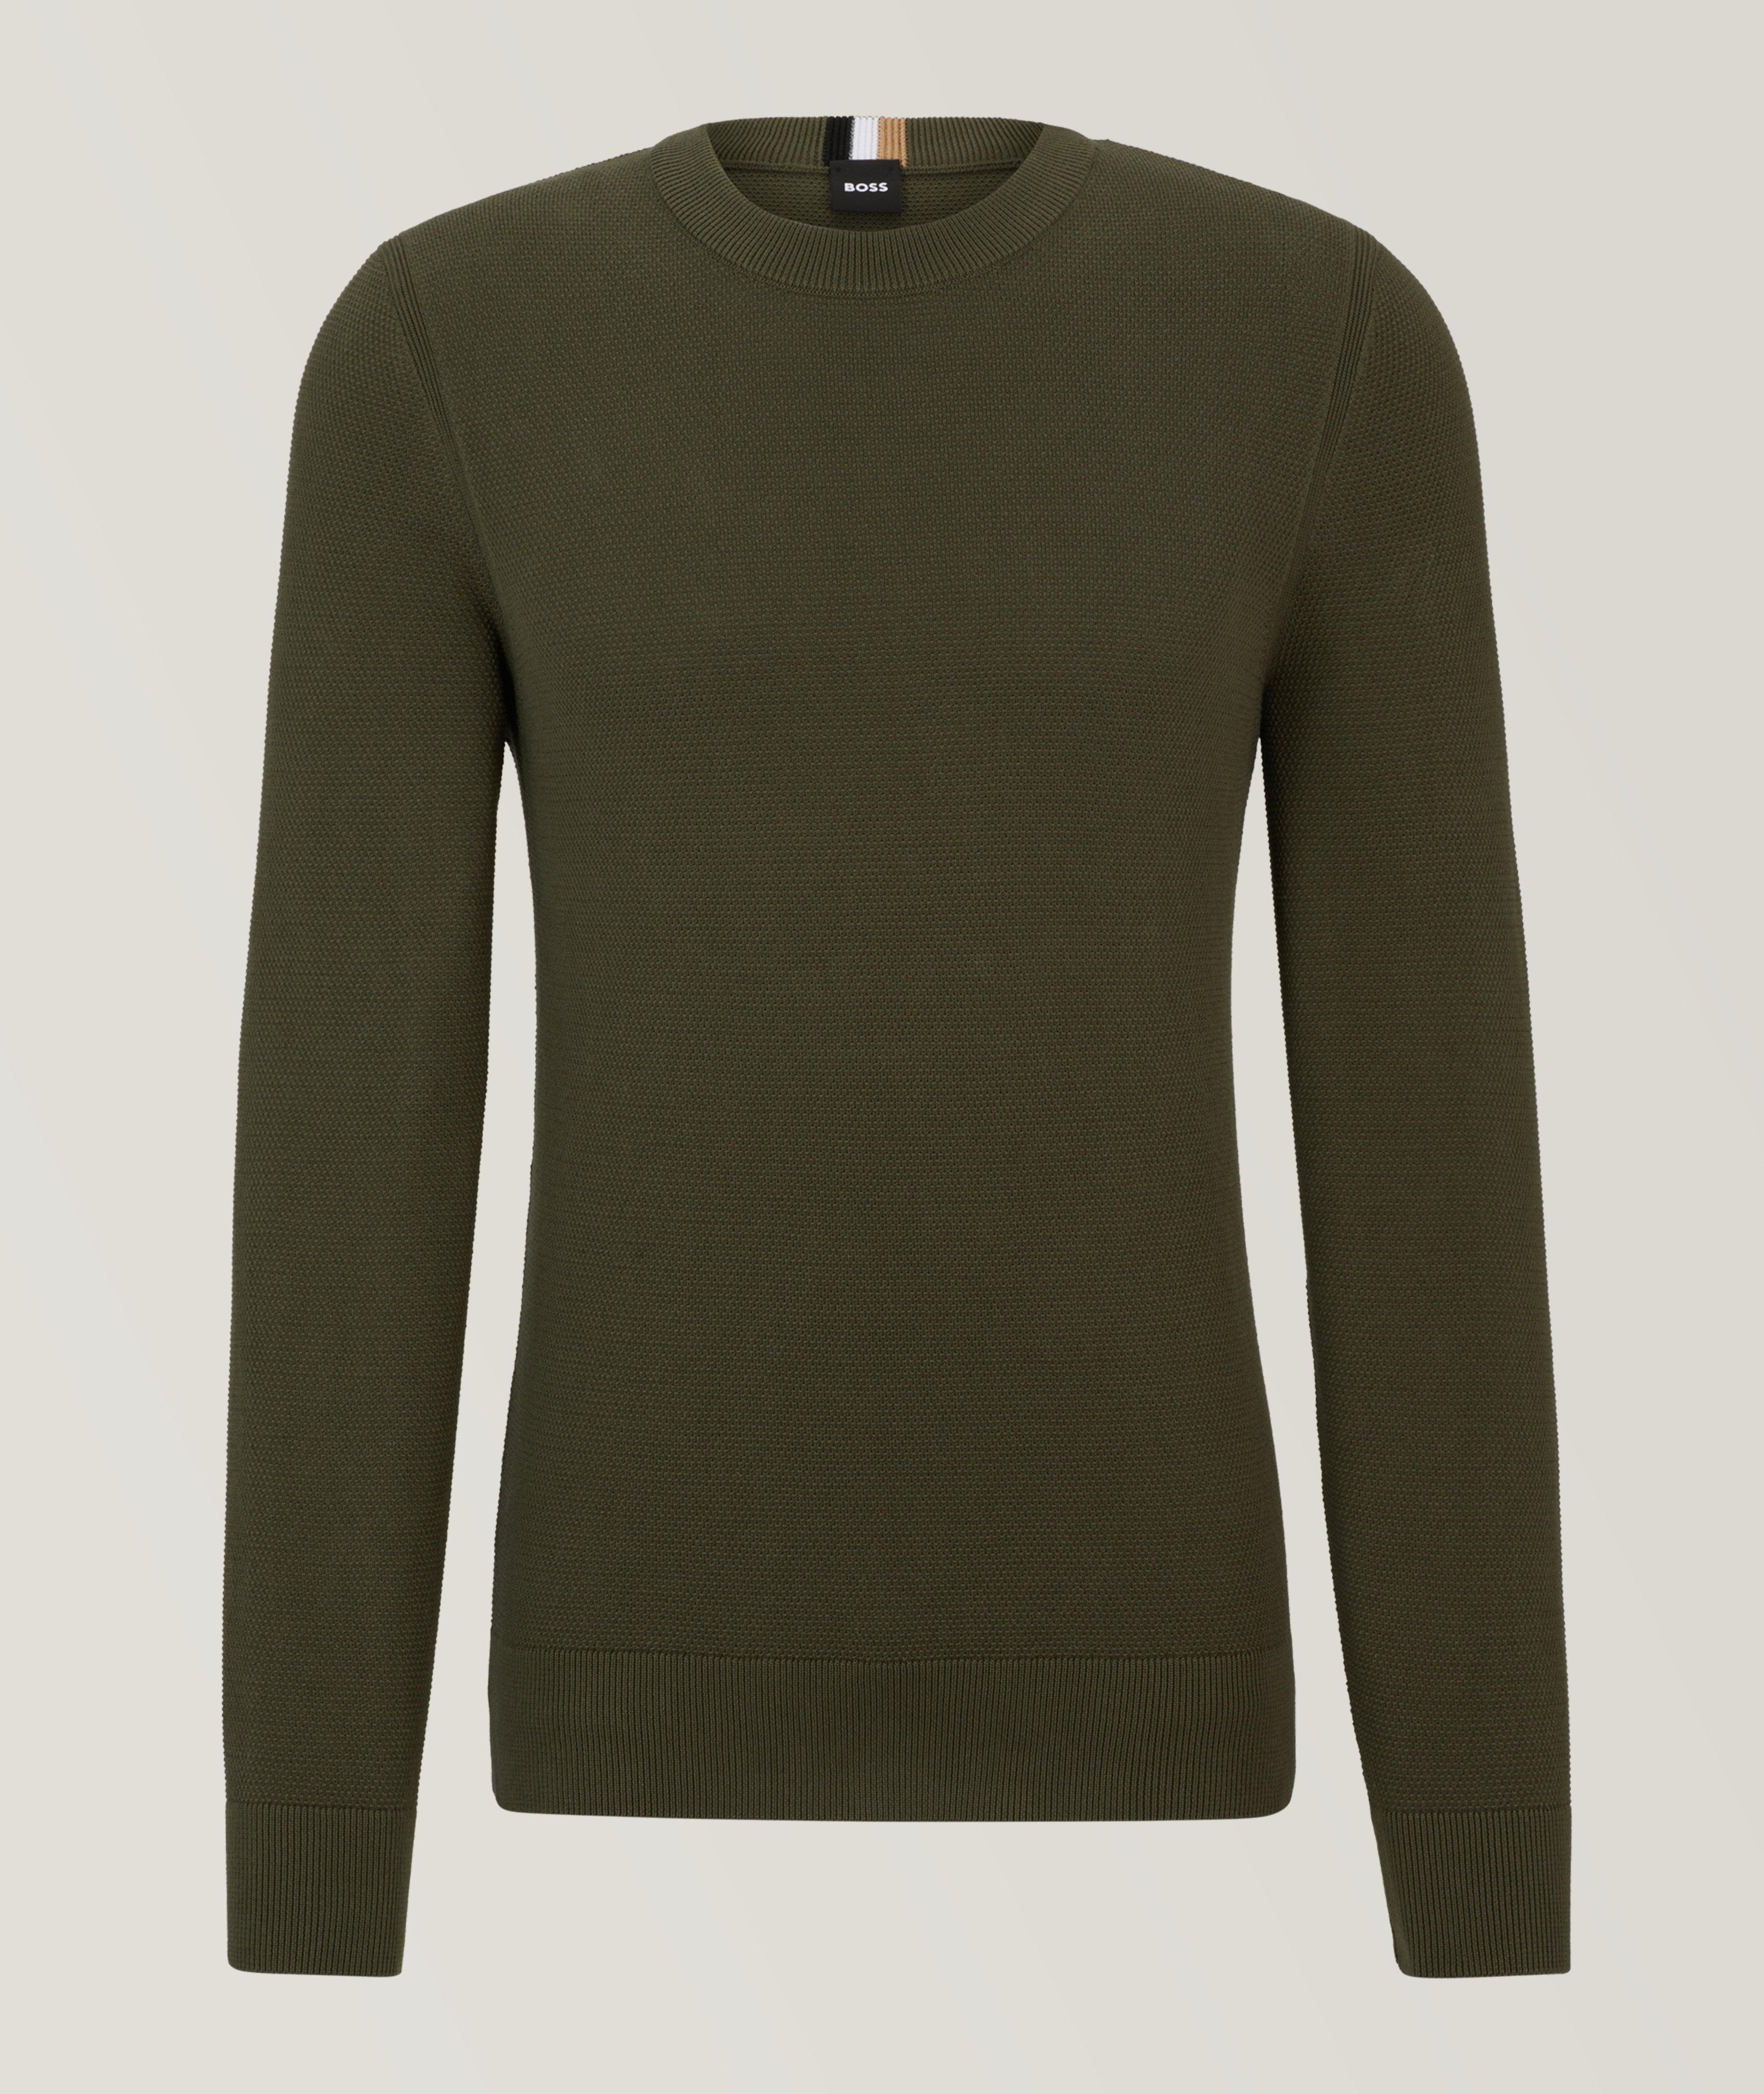 BOSS Micro Structure Cotton Sweater | Sweaters & Knits | Harry Rosen